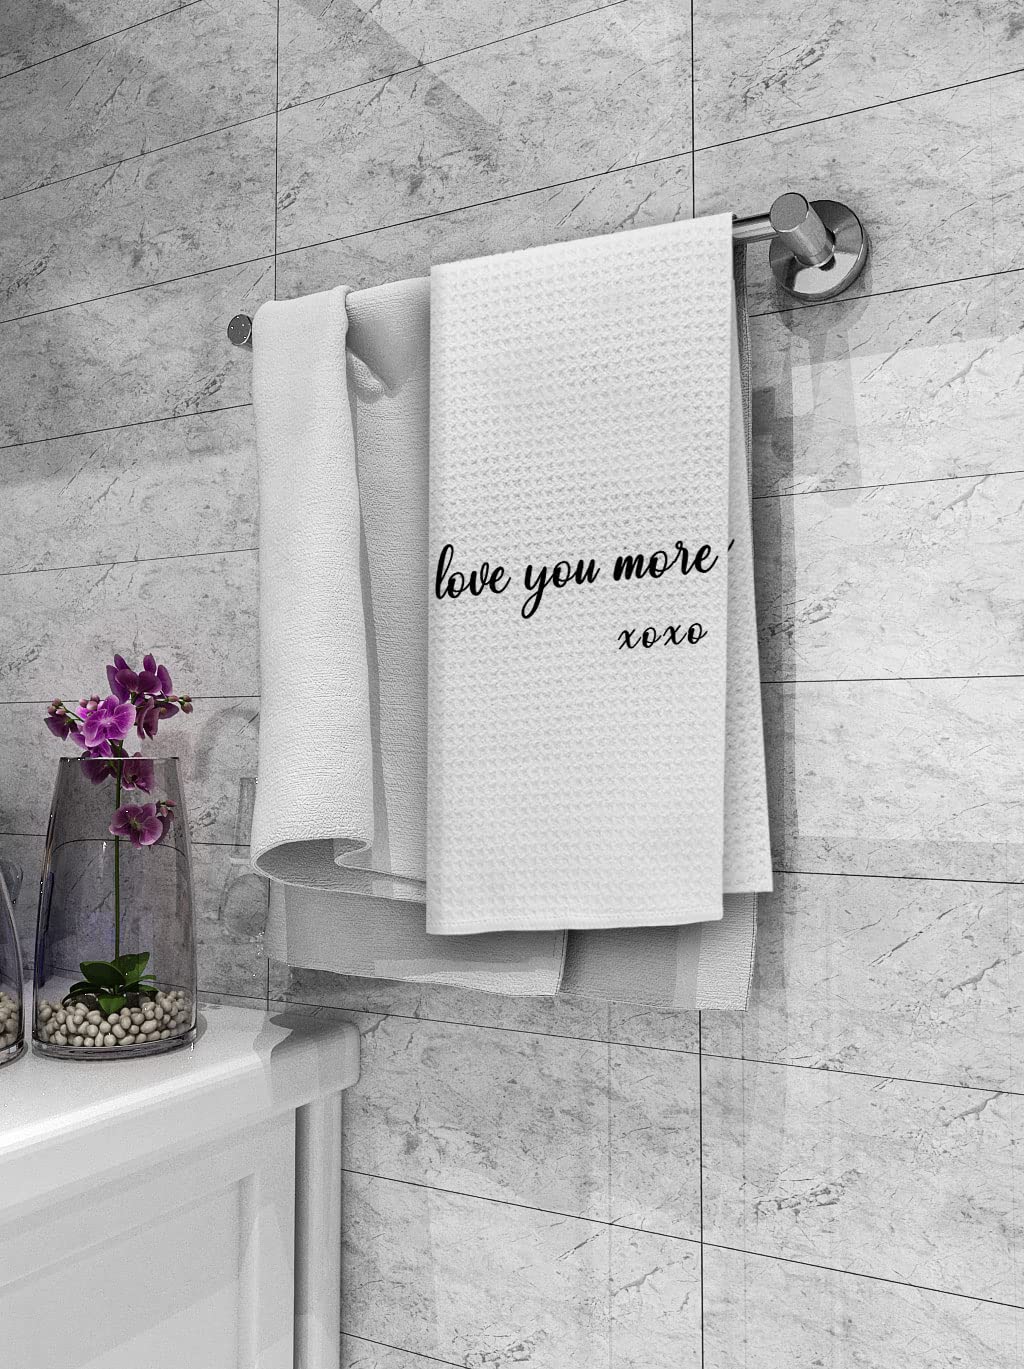 Dibor Funny Quote Love You More XOXO Kitchen Towels Dish Towels Dishcloth,Love Saying Sign Decorative Absorbent Drying Cloth Hand Towels Tea Towels for Bathroom Kitchen,Funny Couples Gifts